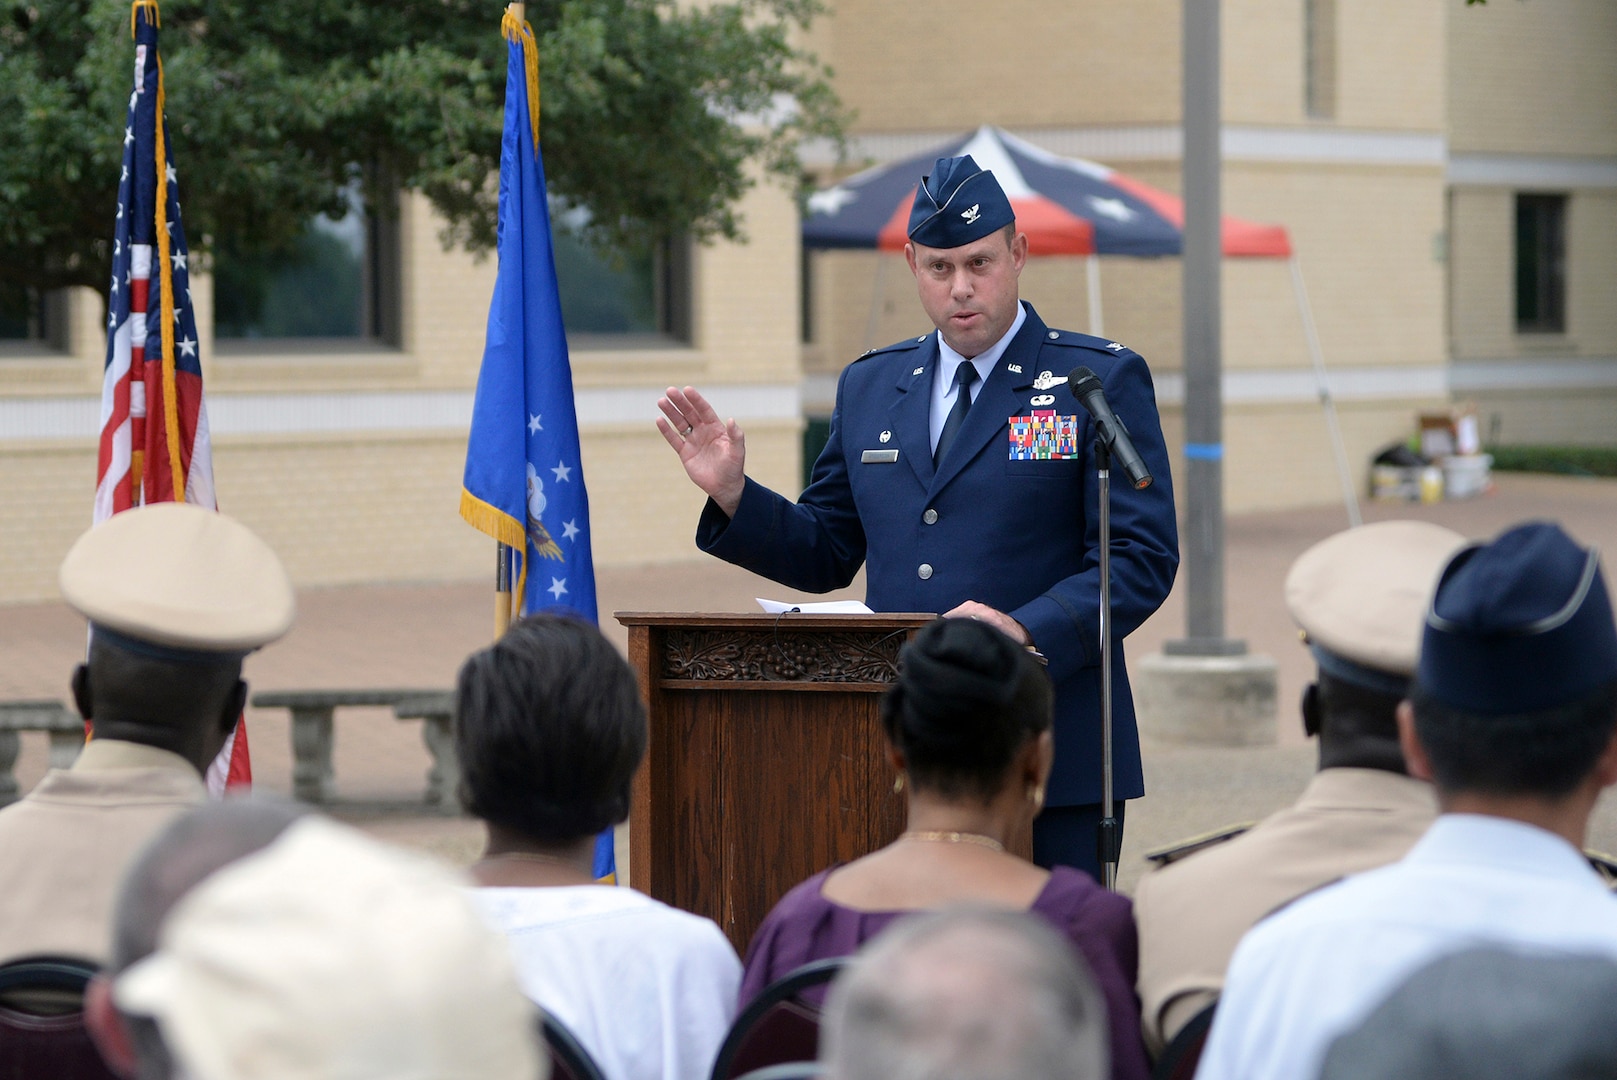 U.S. Air Force Col. Richard D. Anderson, Defense Language Institute English Language Center commandant, speaks to the crowd during the DLIELC anniversary celebration. (U.S. Air Force photo by Johnny Saldivar)